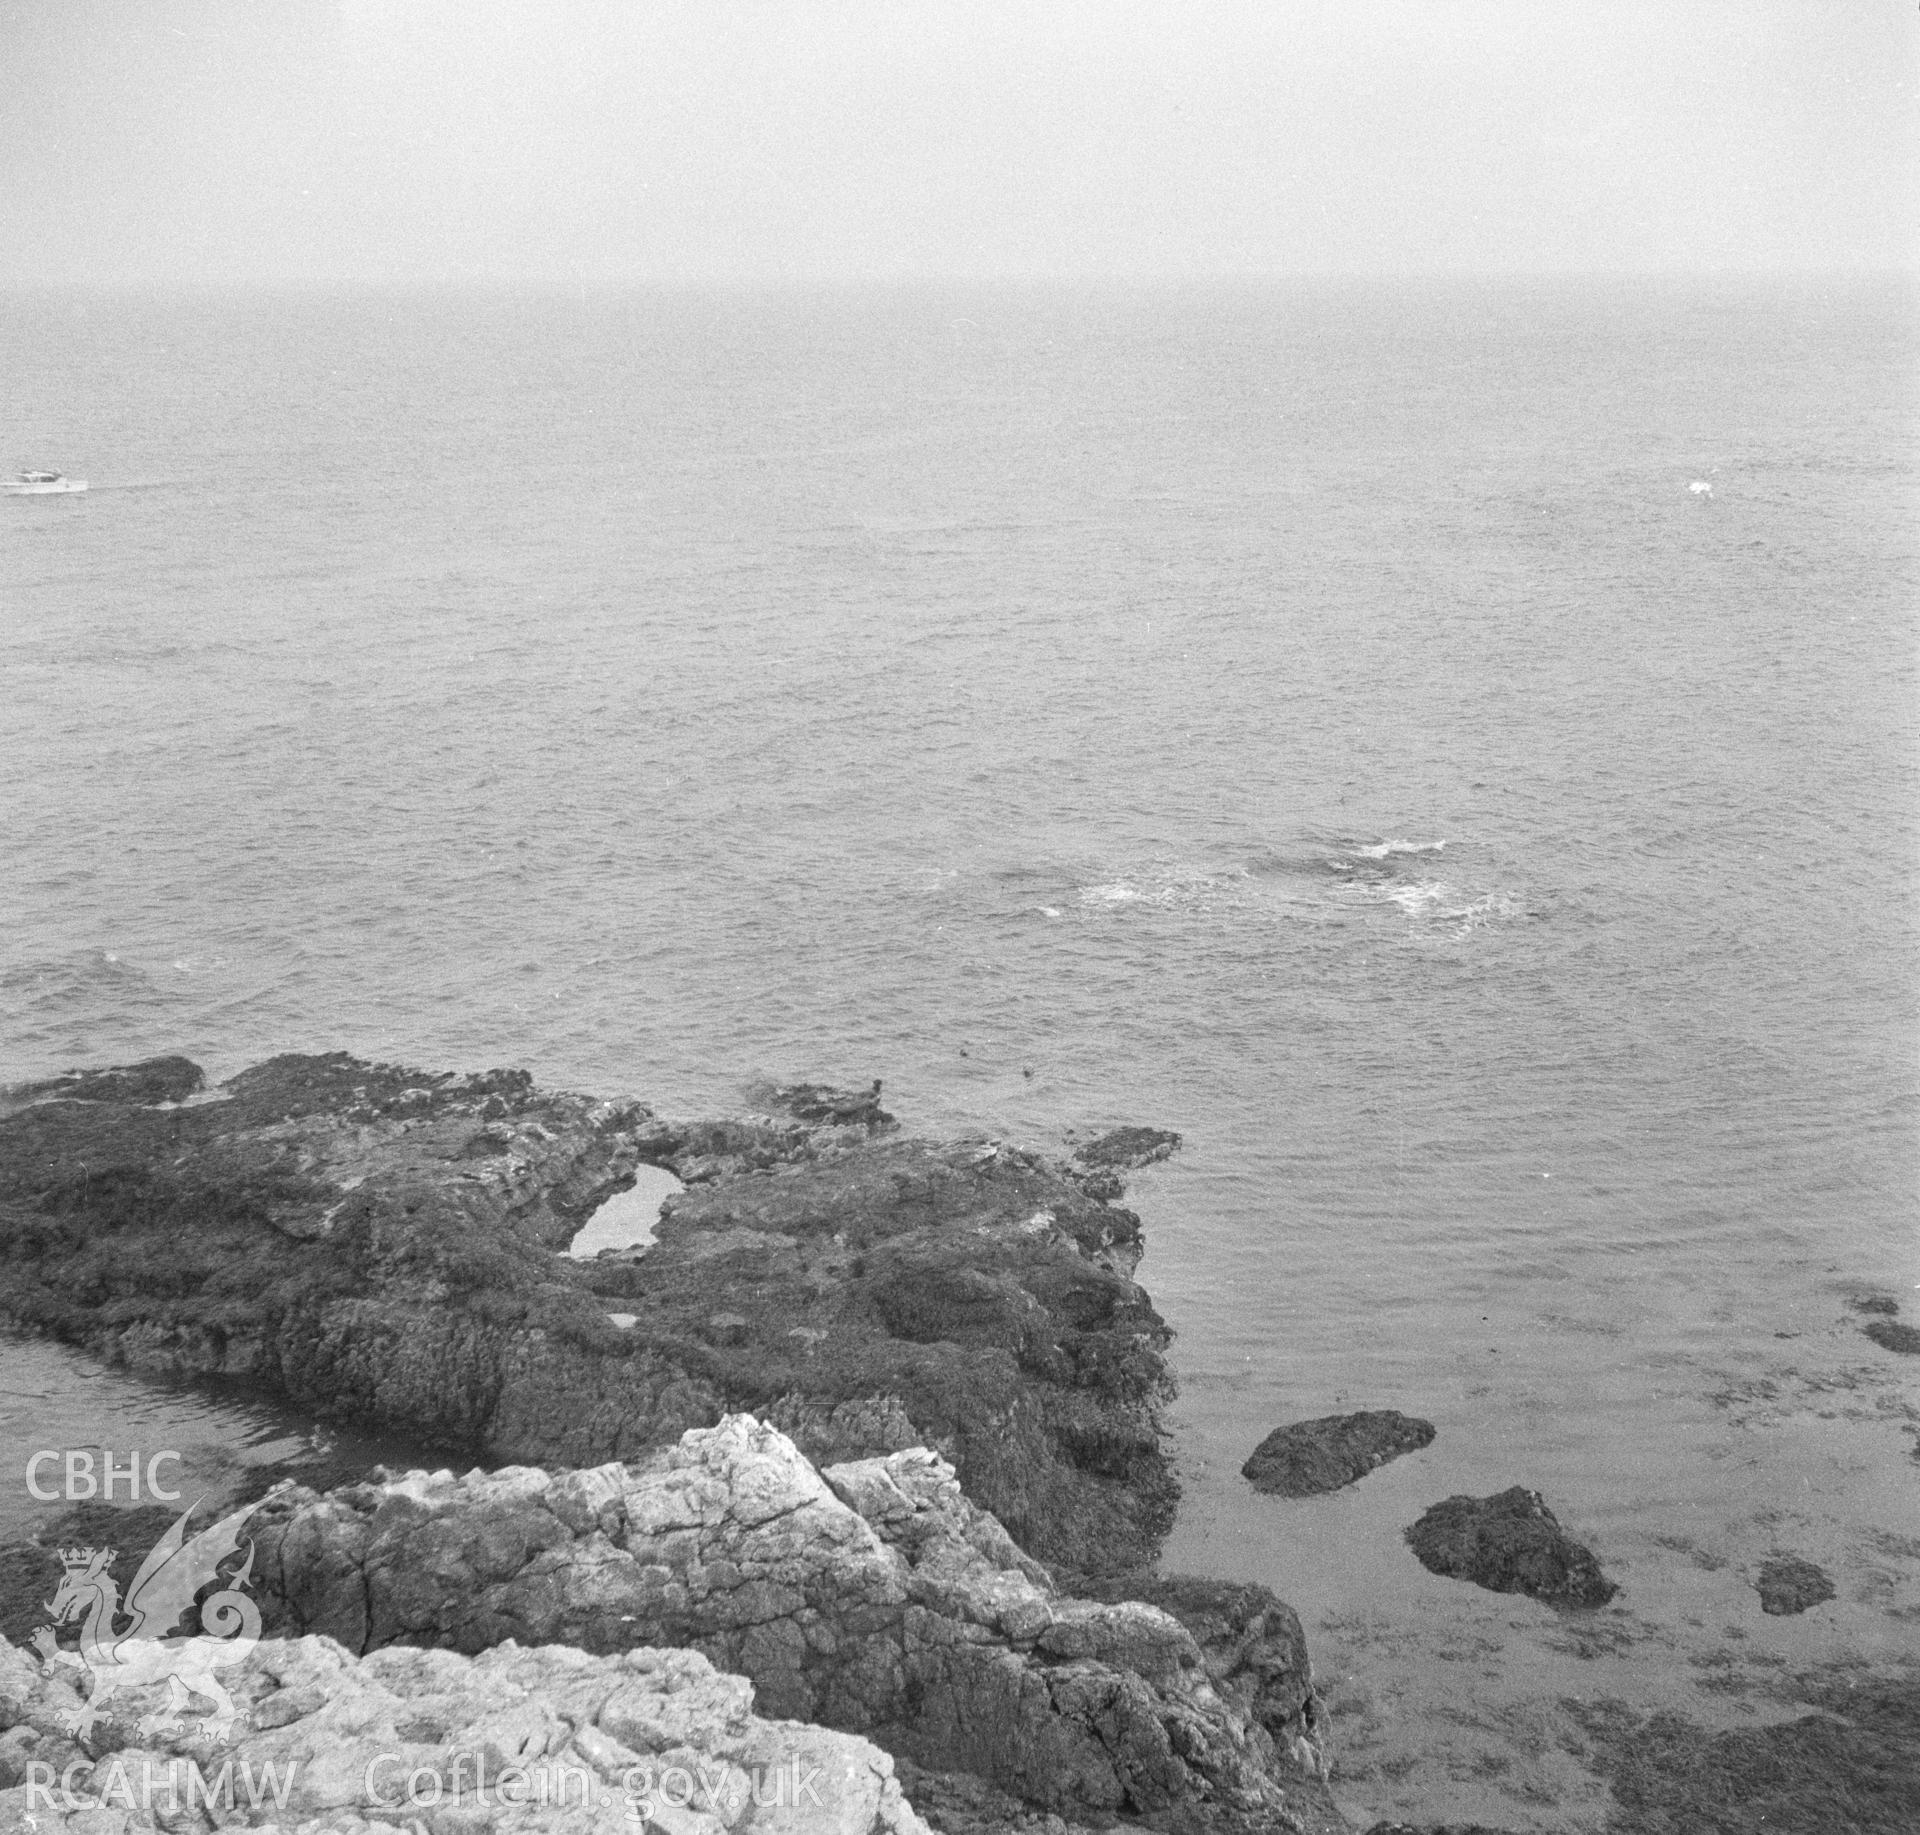 Digital copy of a black and white negative showing Puffin Island coastal view.